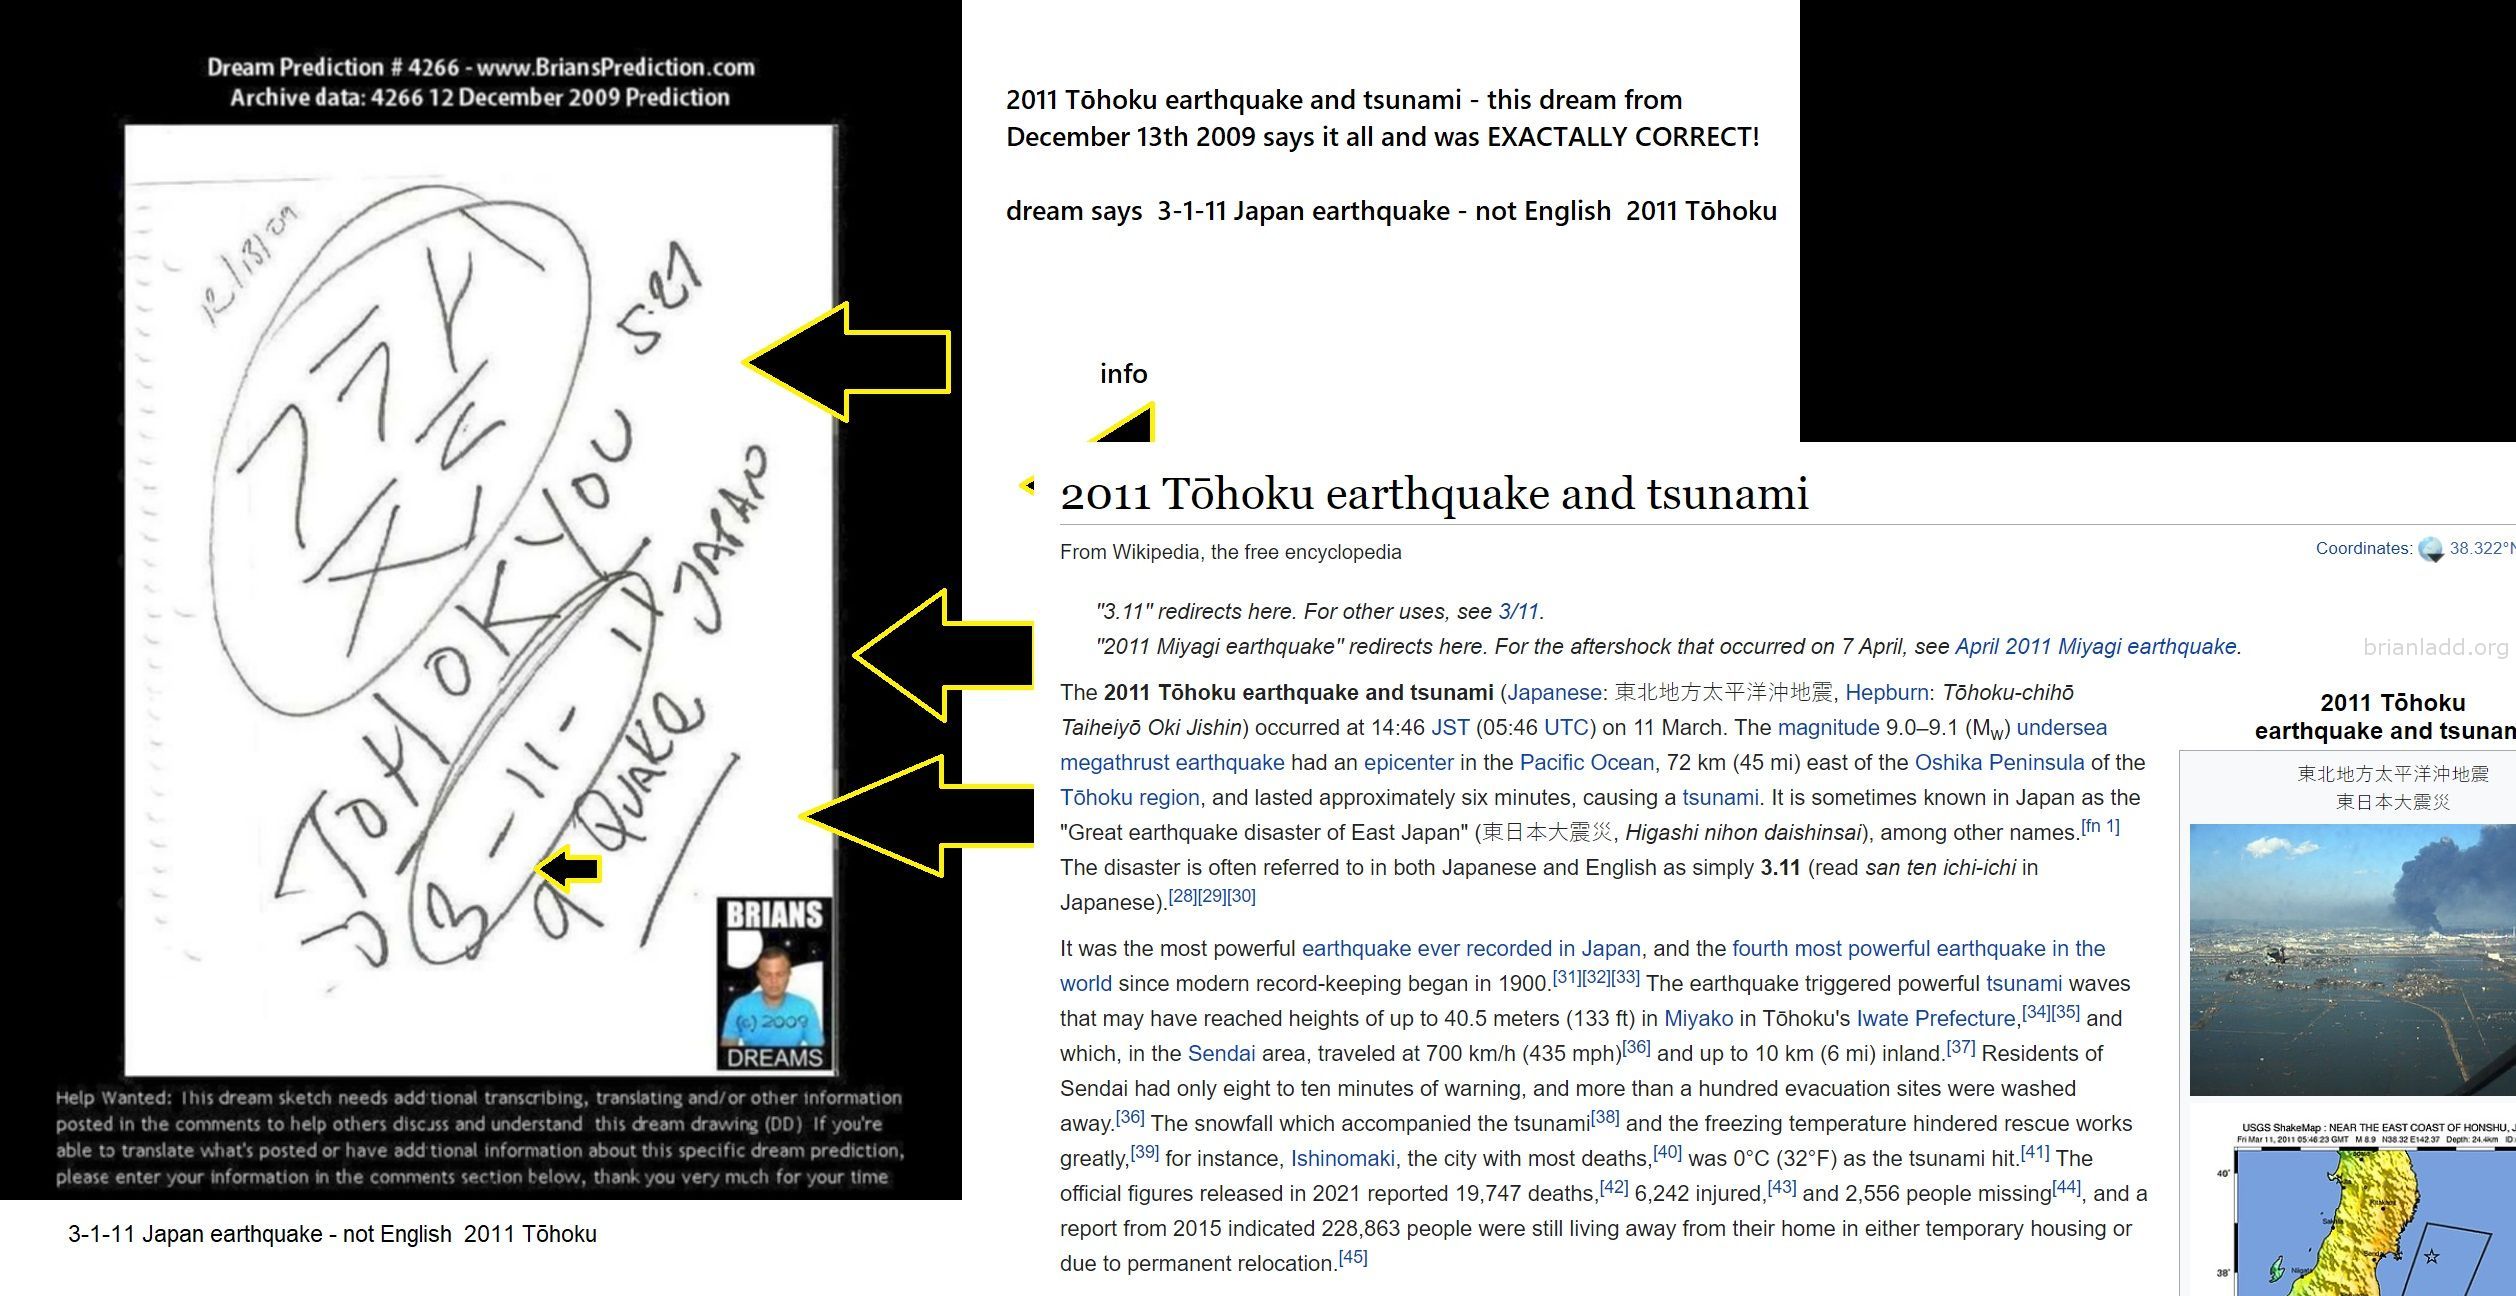 2011 T??Hoku Earthquake And Tsunami This Dream From December 13Th 2009 Says It All And Was Exactally Correct! - 2011 Tō...
2011 Tōhoku earthquake and tsunami - this dream from December 13th 2009 says it all and was EXACTALLY CORRECT!dream says  3-1-11 Japan earthquake - not English  2011 Tōhoku2011 Tōhoku earthquake and tsunami psychic prediction confirmed in 2009infoThe 2011 Tōhoku earthquake and tsunami (Japanese: 東北地方太平洋沖地震, Hepburn: Tōhoku-chihō Taiheiyō Oki Jishin) occurred at 14:46 JST (05:46 UTC) on 11 March. The magnitude 9.0–9.1 (Mw) undersea megathrust earthquake had an epicenter in the Pacific Ocean, 72 km (45 mi) east of the Oshika Peninsula of the Tōhoku region, and lasted approximately six minutes, causing a tsunami. It is sometimes known in Japan as the "Great earthquake disaster of East Japan" (東日本大震災, Higashi nihon daishinsai), among other names.[fn 1] The disaster is often referred to in both Japanese and English as simply 3.11 (read san ten ichi-ichi in Japanese).[28][29][30]It was the most powerful earthquake ever recorded in Japan, and the fourth most powerful earthquake in the world since modern record-keeping began in 1900.[31][32][33] The earthquake triggered powerful tsunami waves that may have reached heights of up to 40.5 meters (133 ft) in Miyako in Tōhoku's Iwate Prefecture,[34][35] and which, in the Sendai area, traveled at 700 km/h (435 mph)[36] and up to 10 km (6 mi) inland.[37] Residents of Sendai had only eight to ten minutes of warning, and more than a hundred evacuation sites were washed away.[36] The snowfall which accompanied the tsunami[38] and the freezing temperature hindered rescue works greatly,[39] for instance, Ishinomaki, the city with most deaths,[40] was 0°C (32°F) as the tsunami hit.[41] The official figures released in 2021 reported 19,747 deaths,[42] 6,242 injured,[43] and 2,556 people missing[44], and a report from 2015 indicated 228,863 people were still living away from their home in either temporary housing or due to permanent relocation.[45]original at https://briansprediction.com/displayimage.php?album=topn&cat=0&pid=80390#top_display_media
